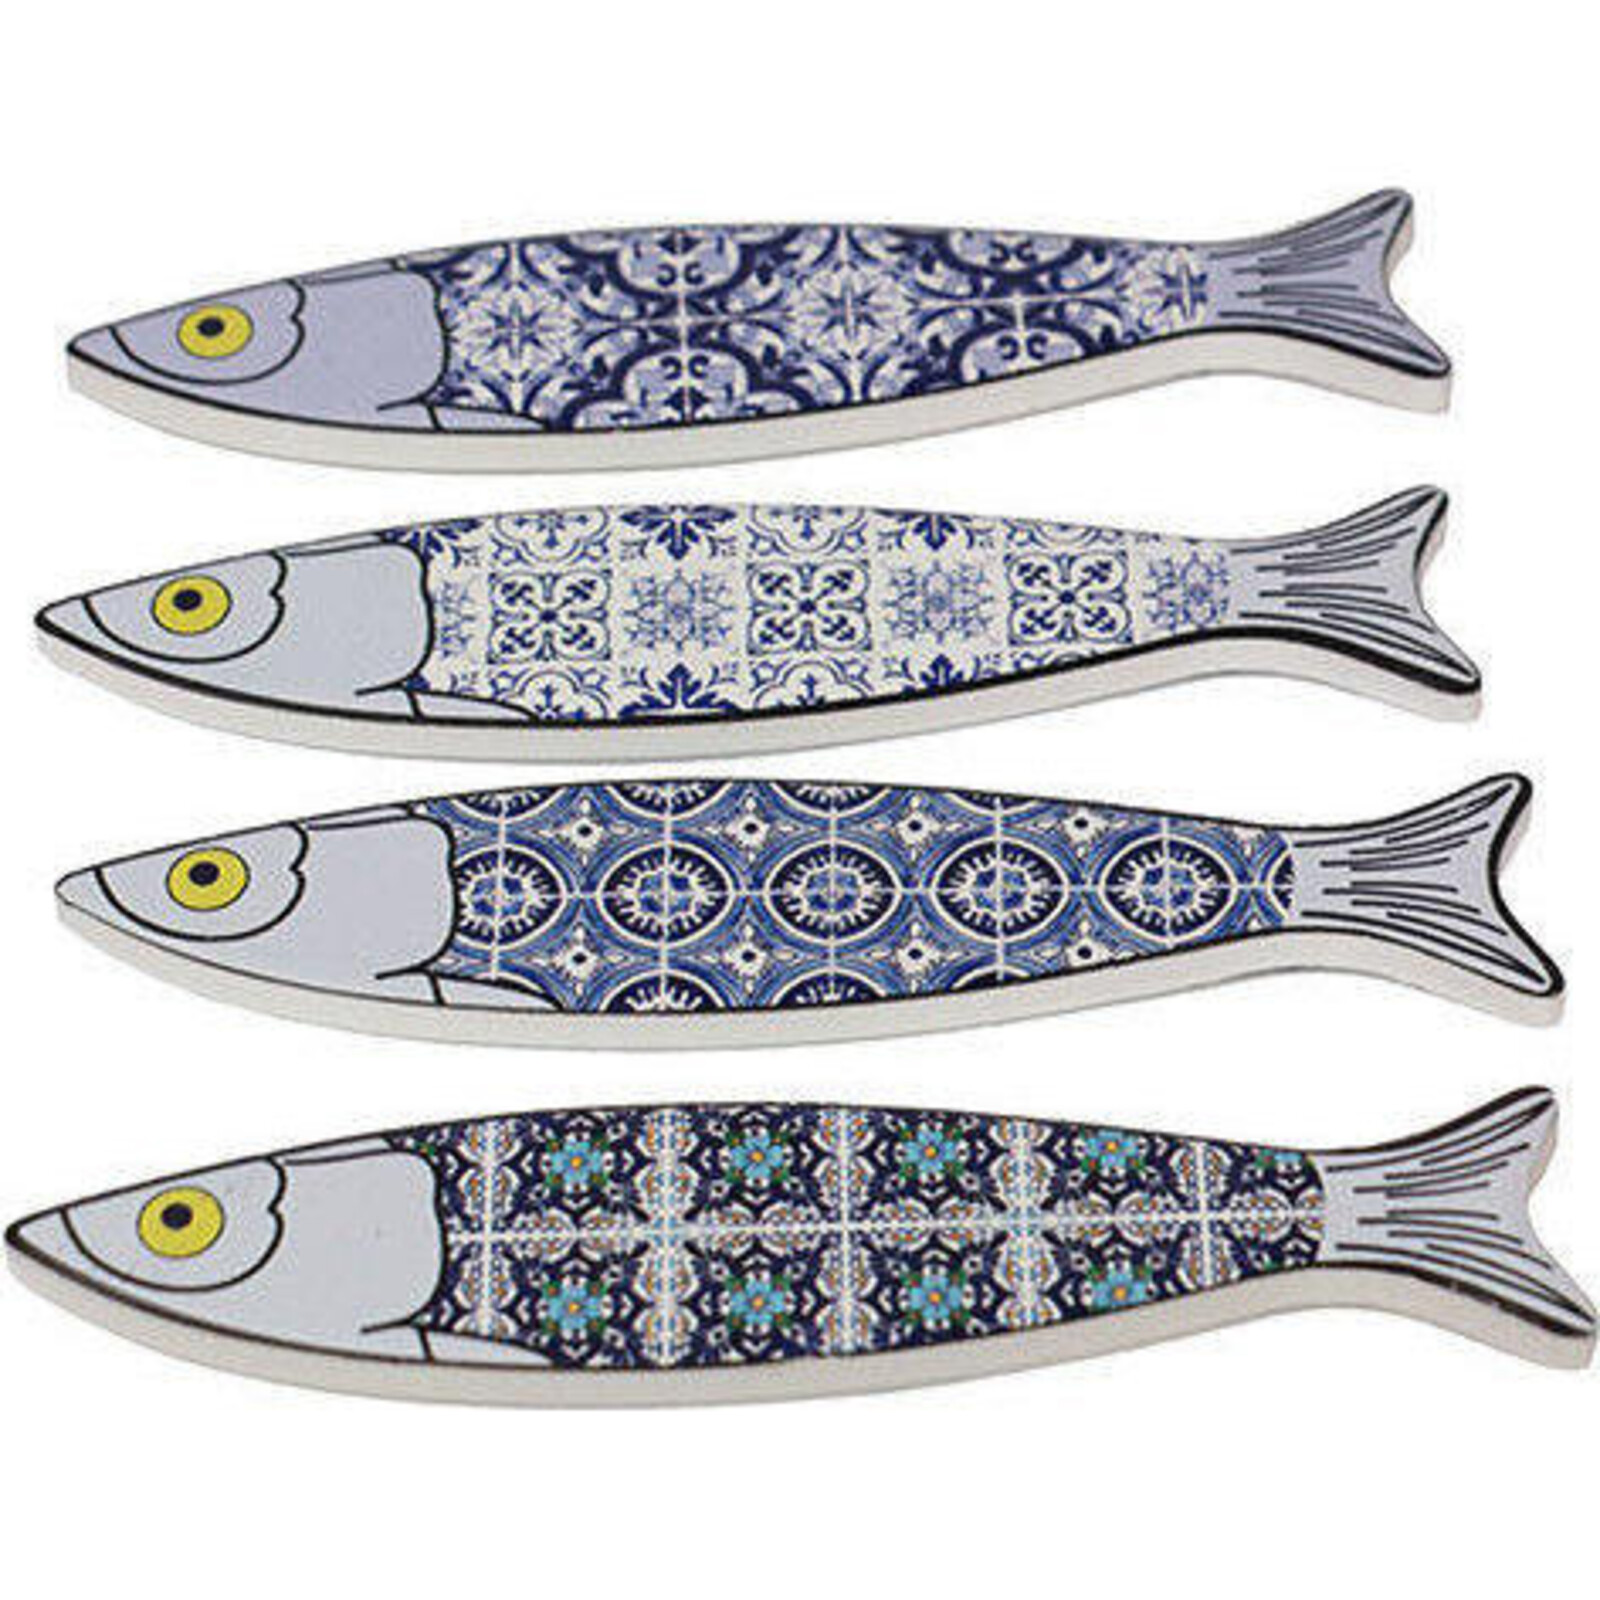 Magnets Pattern Fish S/4